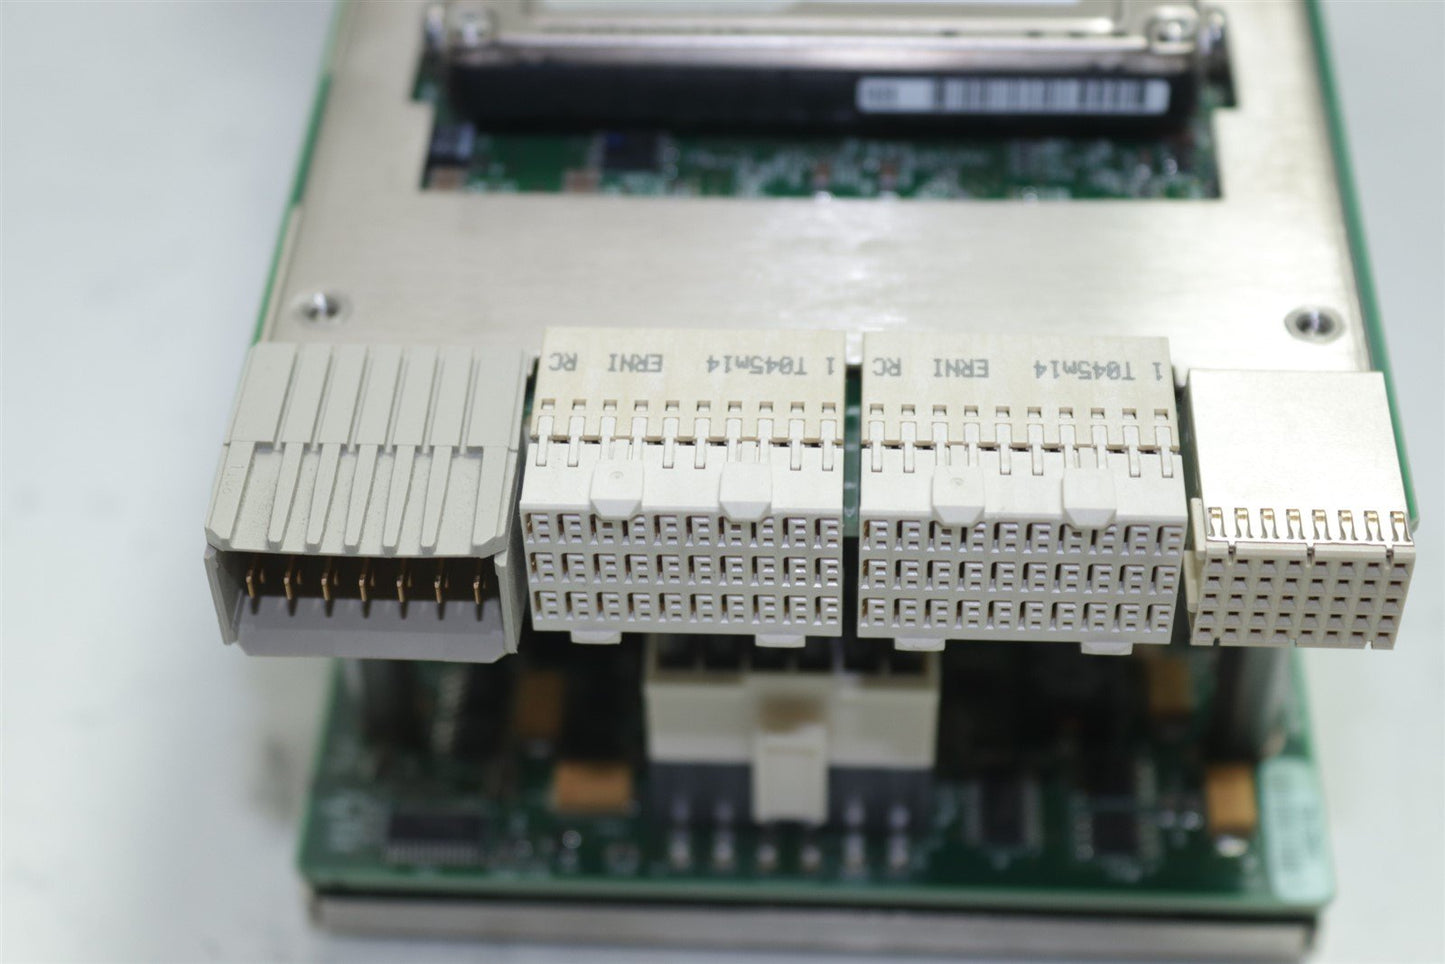 National Instruments NI PXIe-8106 2.16 GHz Dual-Core Embedded Controller